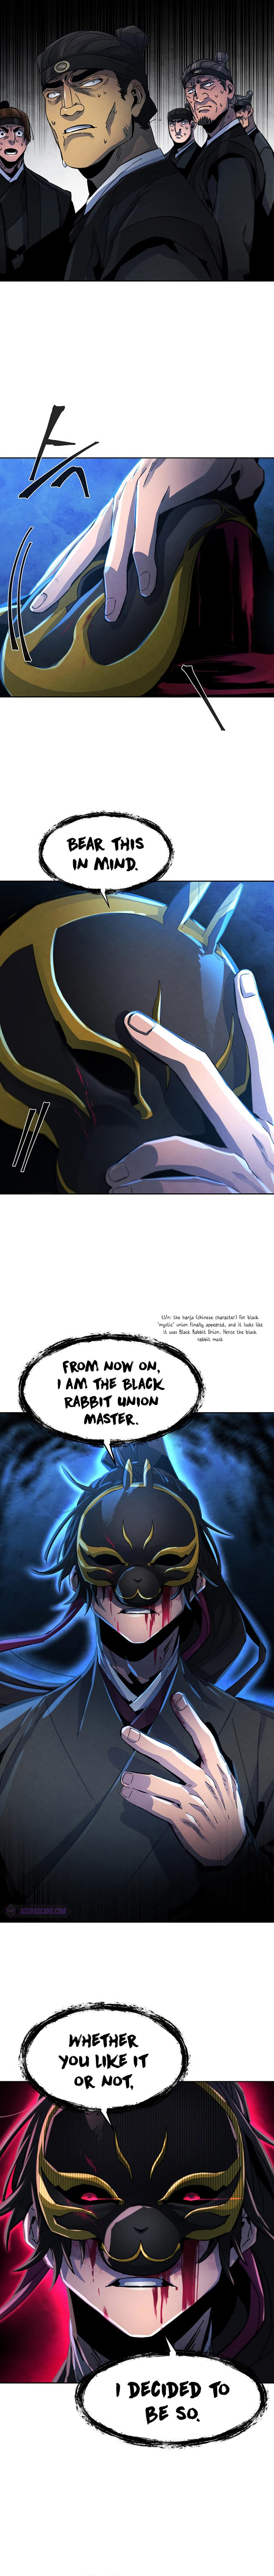 The Return of the Crazy Demon - Chapter 22 Page 4